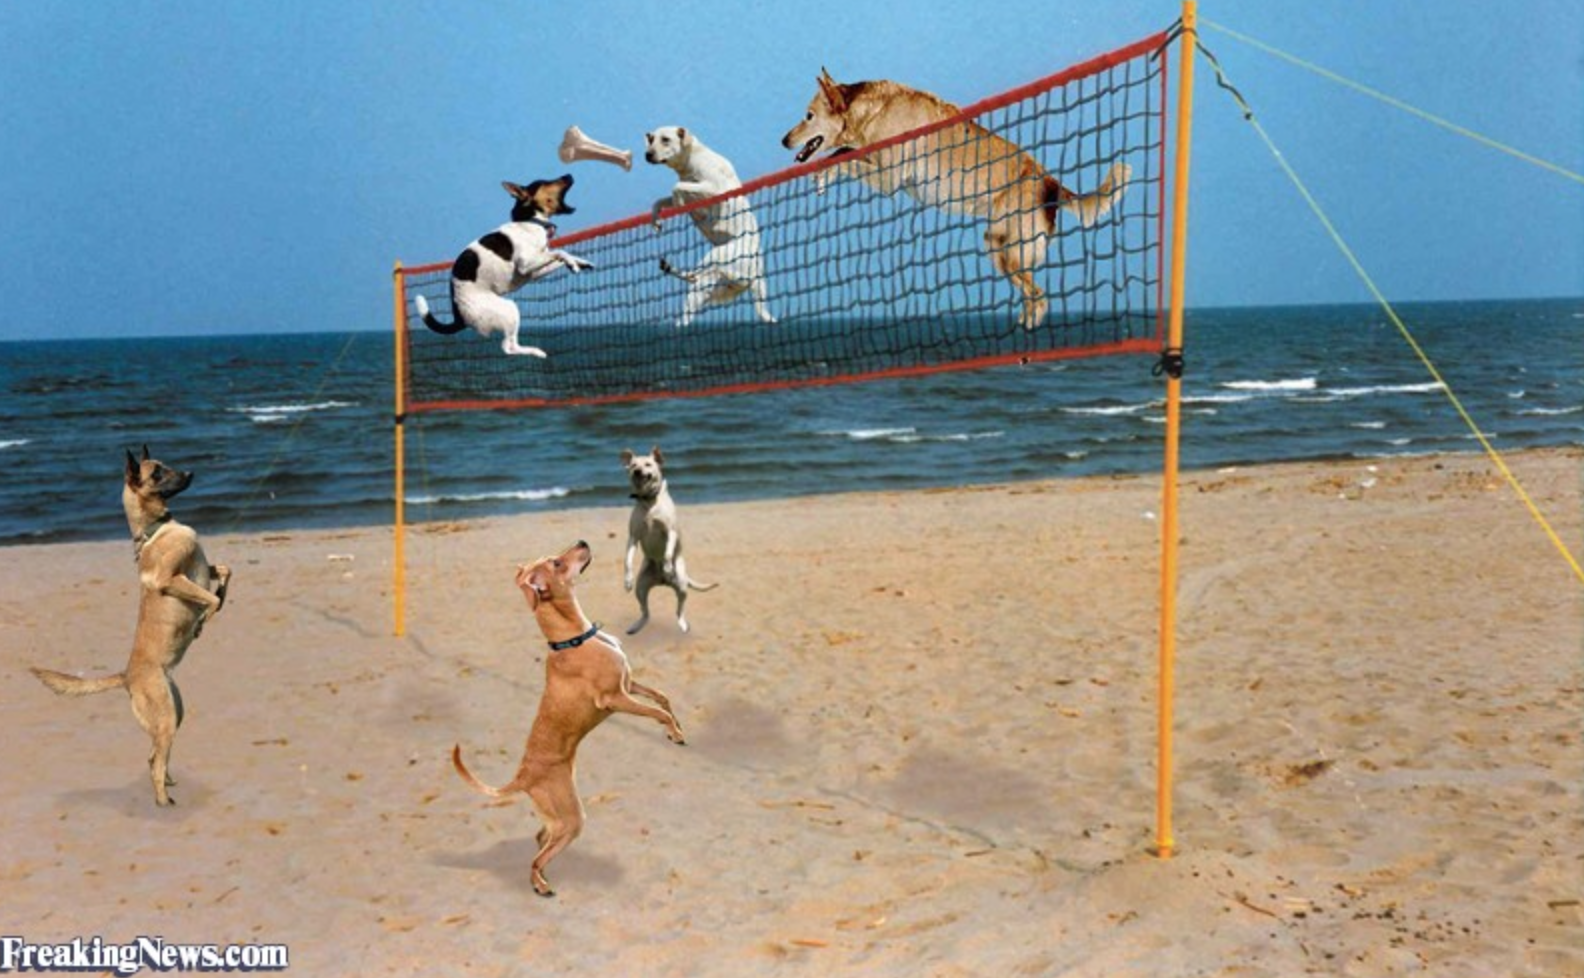 Pawsitively Awesome Beach Volleyball Plays By DOGS!